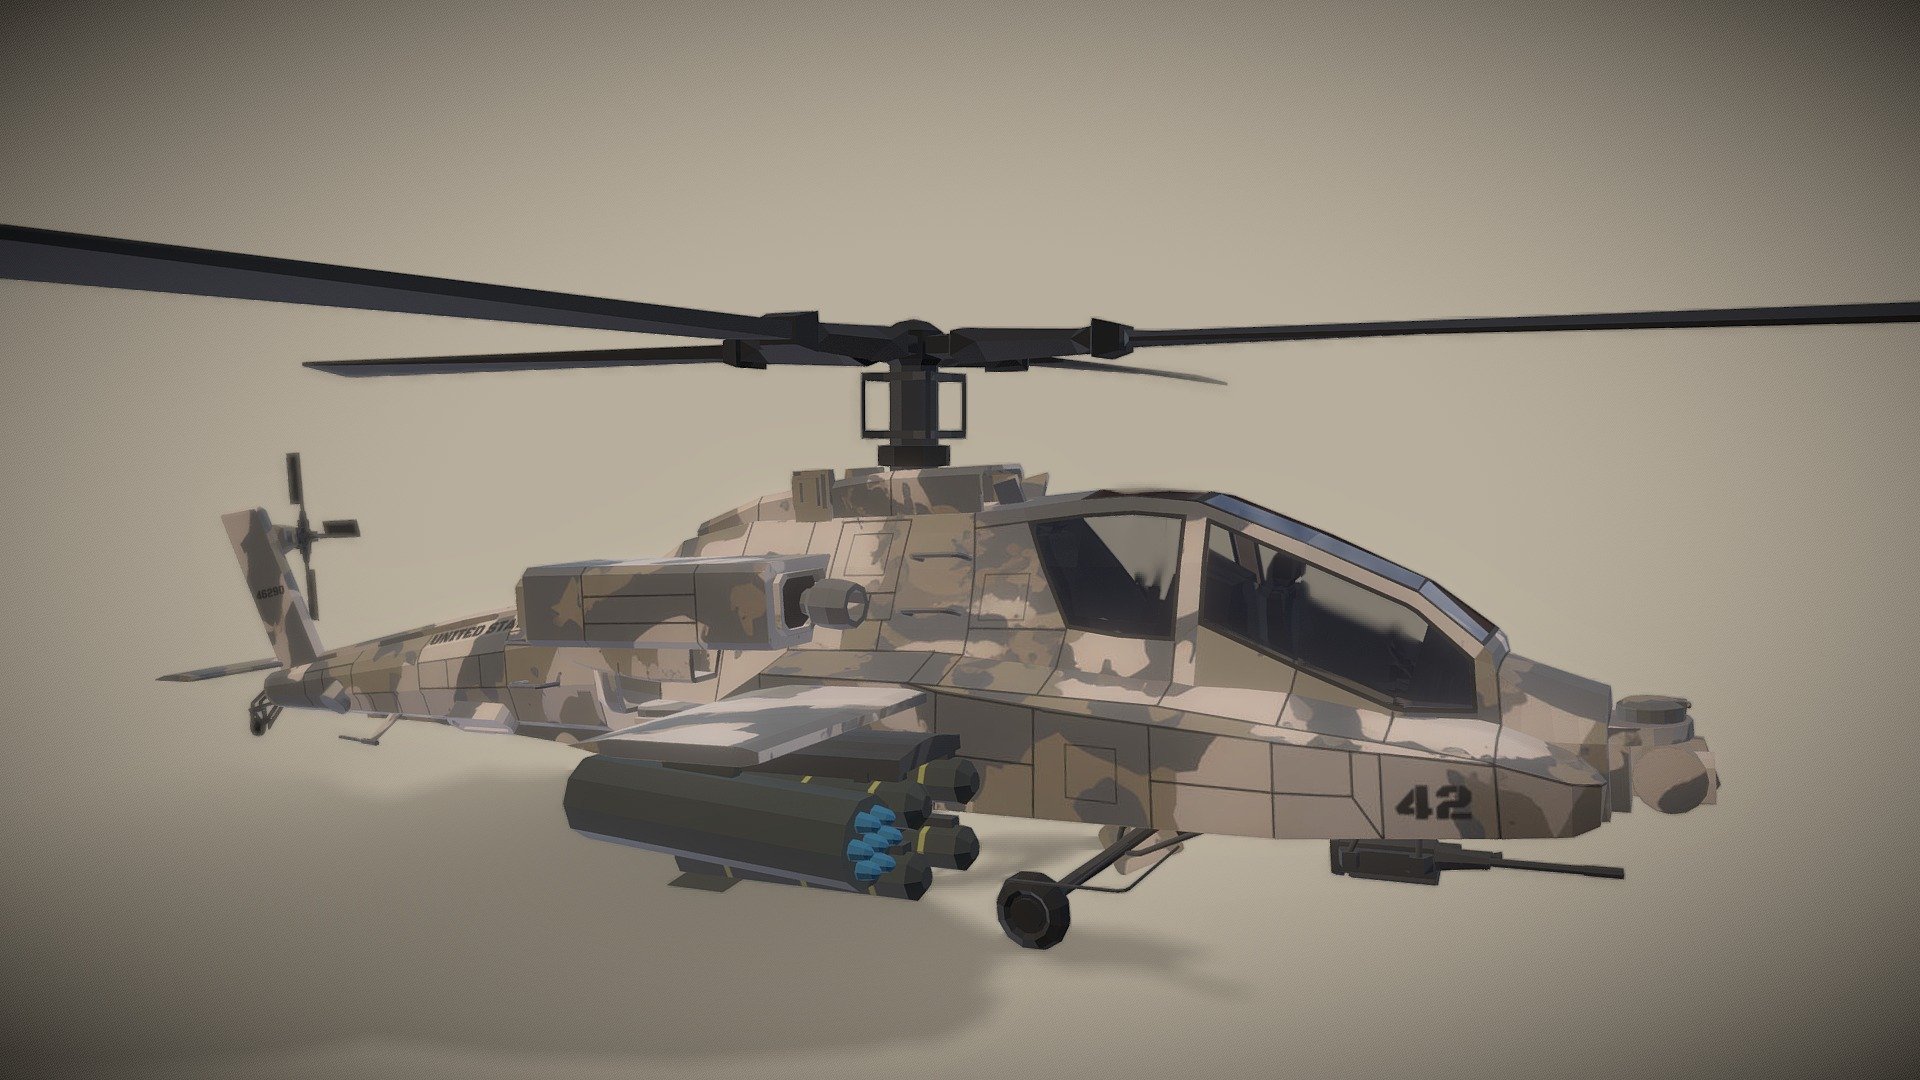 As a Special offer I am selling this model for only $5!  It's a 50% discount. 

I modeled this stylized AH-64 Apache in Blender and Textured it in Substance Painter for a retro Unity project to match the style of an existing kit created by Synty with a few minor modifications for functionality. The model includes an M230 Bushmaster Chain Gun, Hydra-70 2.75-inch rockets, and HELLFIRE missiles.  It's highly optimized and suitable for mobile, AR, and VR applications.  Alternate materials available upon request.  Contact me here on sketchfab or you can visit my website https://bonnieartsimeone.wixsite.com/my-site to request other material options. The source .blend file can also be made available for a small fee.  

Here is a link to the asset package sold by Synty.  https://syntystore.com/products/polygon-military-pack?_pos=1&amp;_sid=fb725b33c&amp;_ss=r 3d model